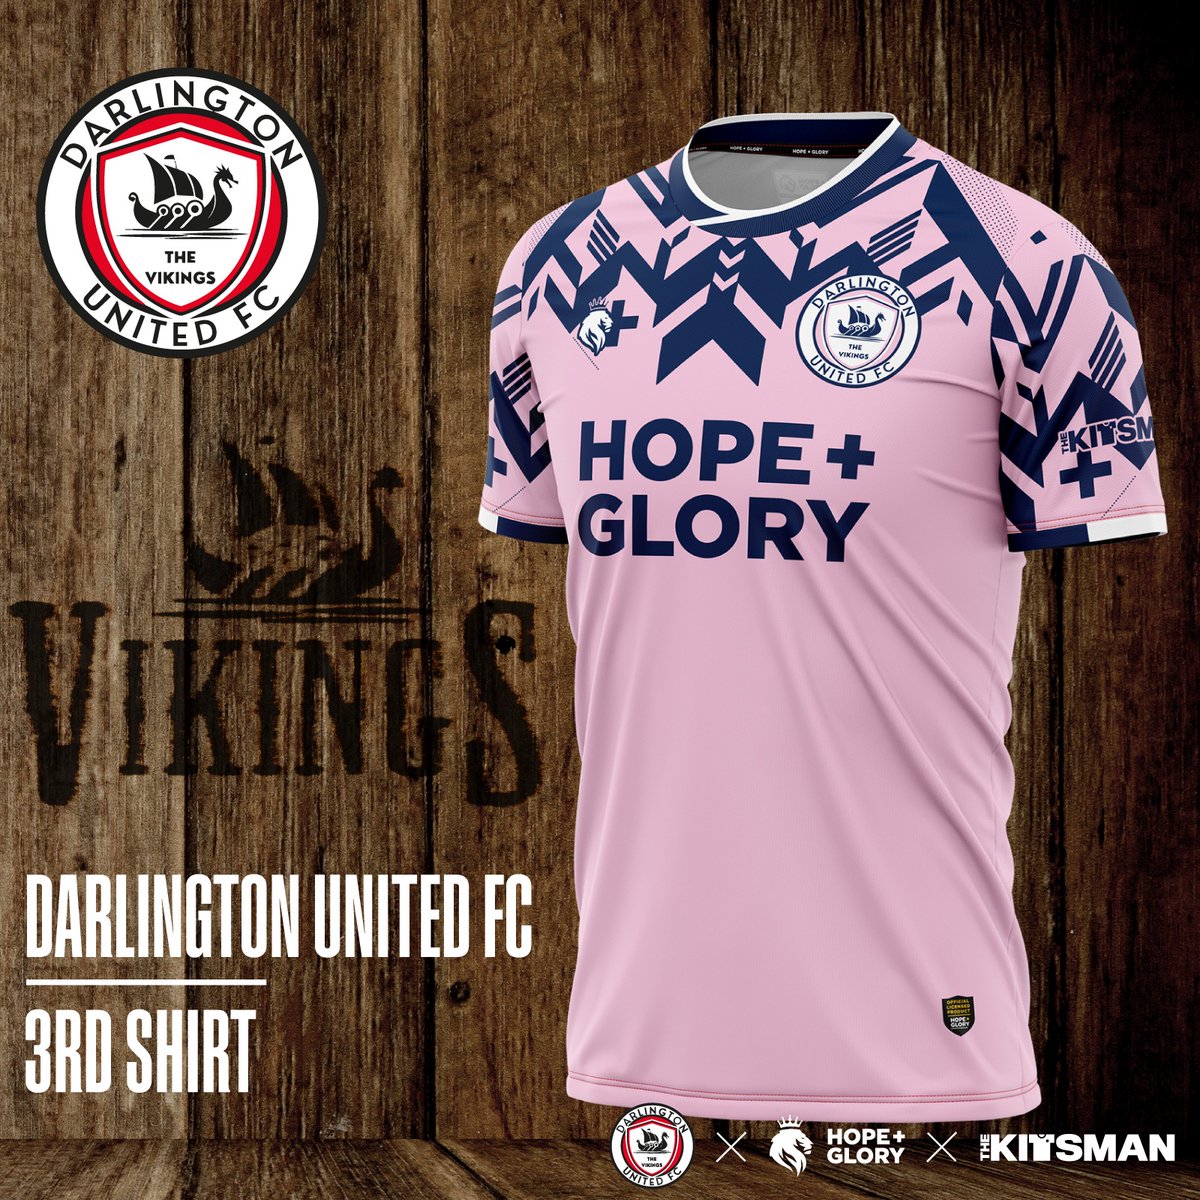 CONTEST: Be the first person to have the complete set of @darlingtonutd kits - simply like & retweet this tweet then follow us for a chance to win. Don'tforget they are available to pre-order now until May 21st if you want to lock yours in! @hgsportswear @The_Kitsman